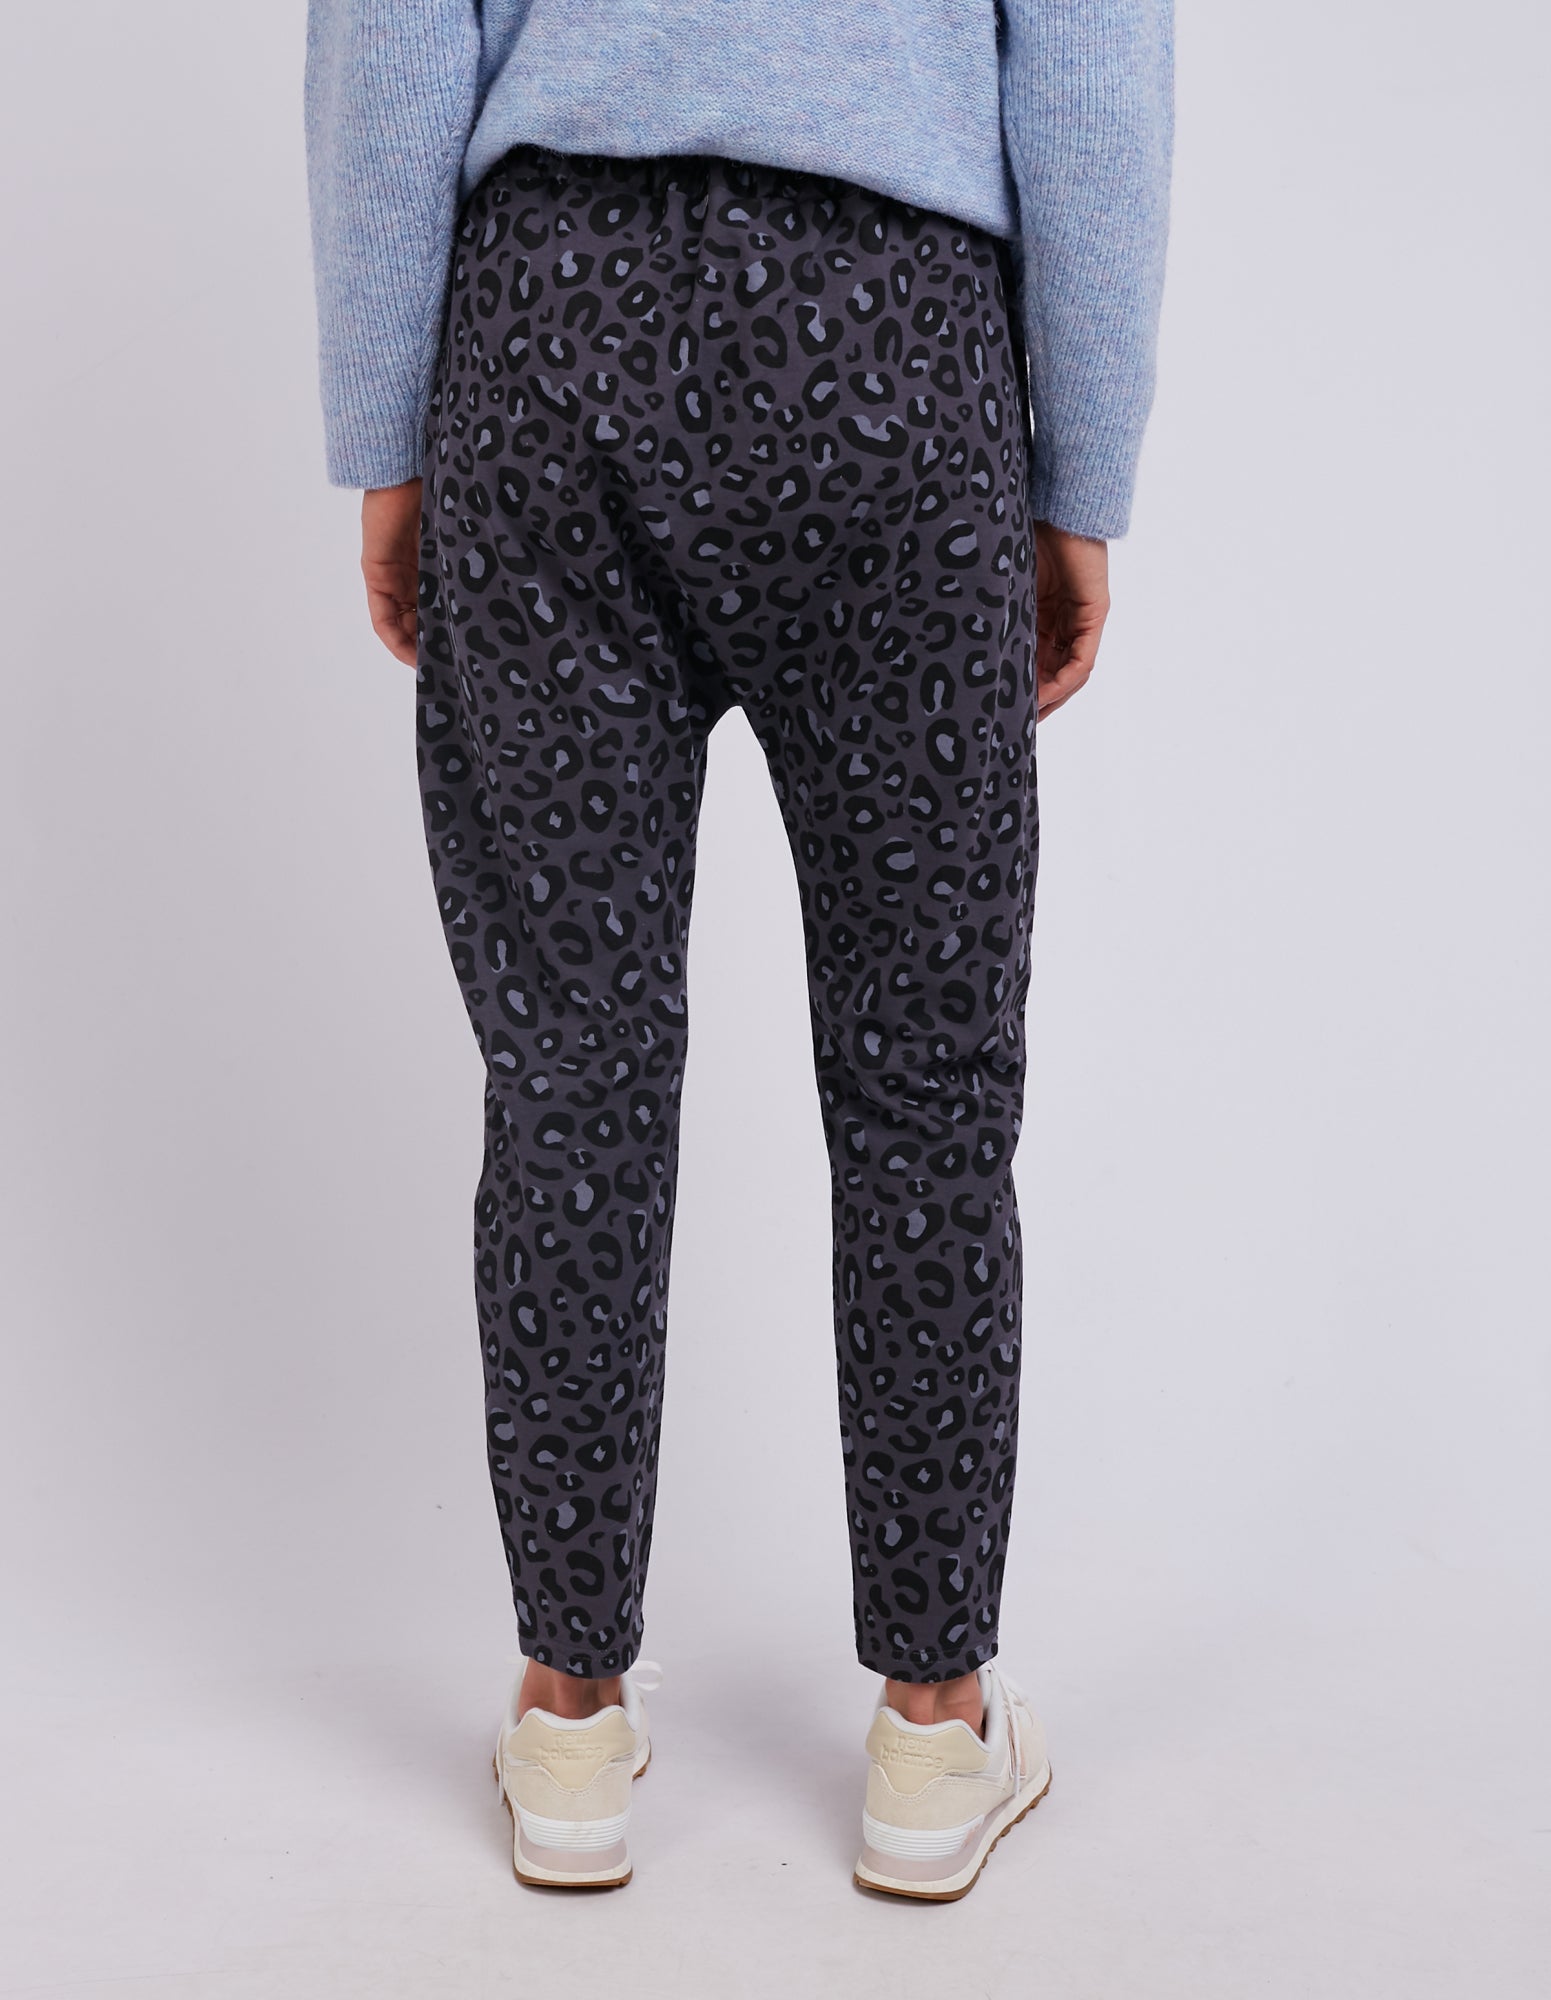 Fearless Lounge Pant Charcoal Leopard Print